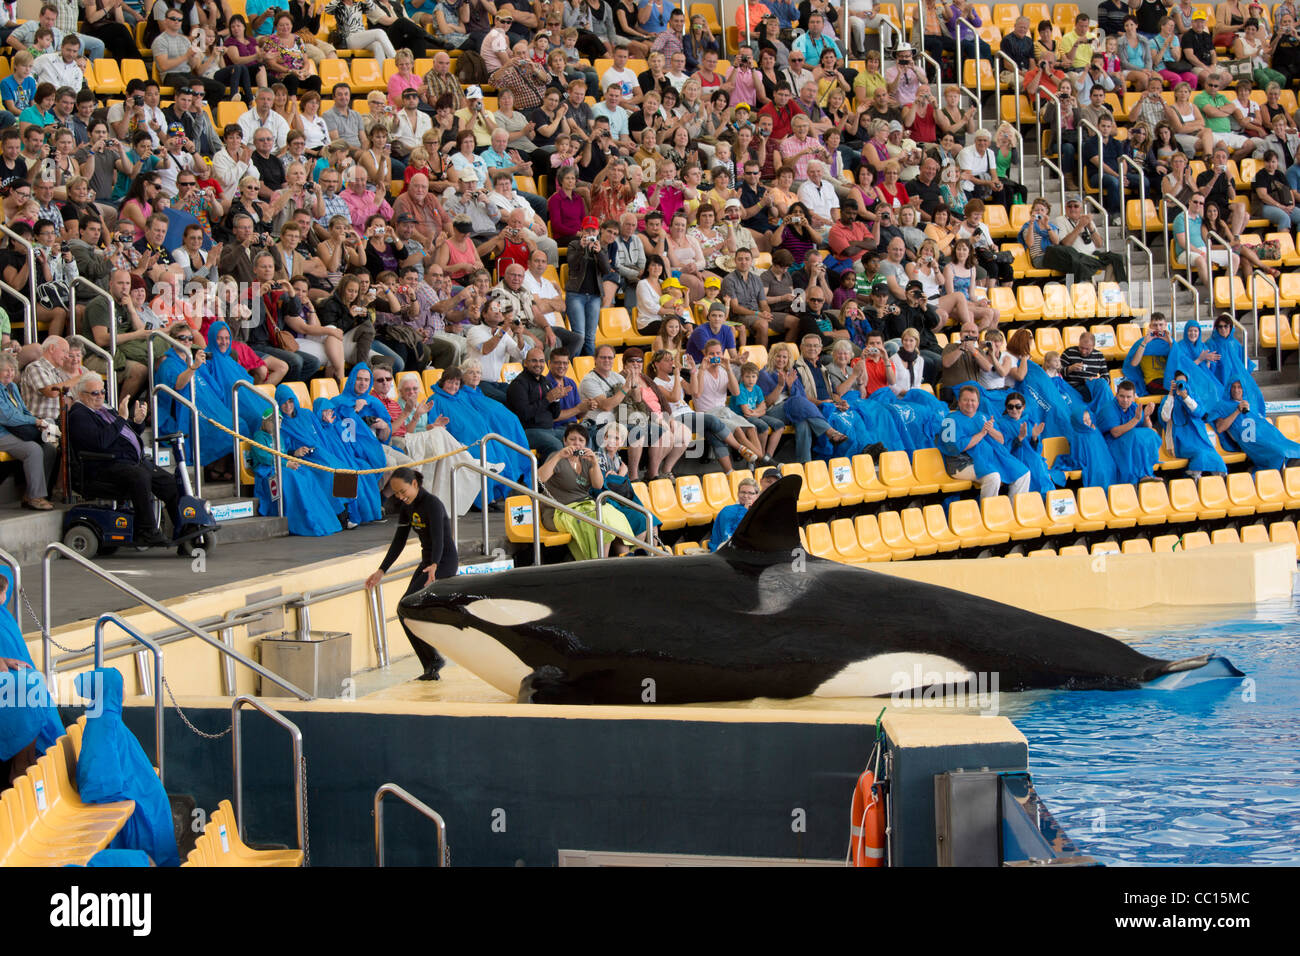 Loro Parque, Tenerife's prime wildlife-zoo attraction. Crowds at the Orca killer whale show. Stock Photo